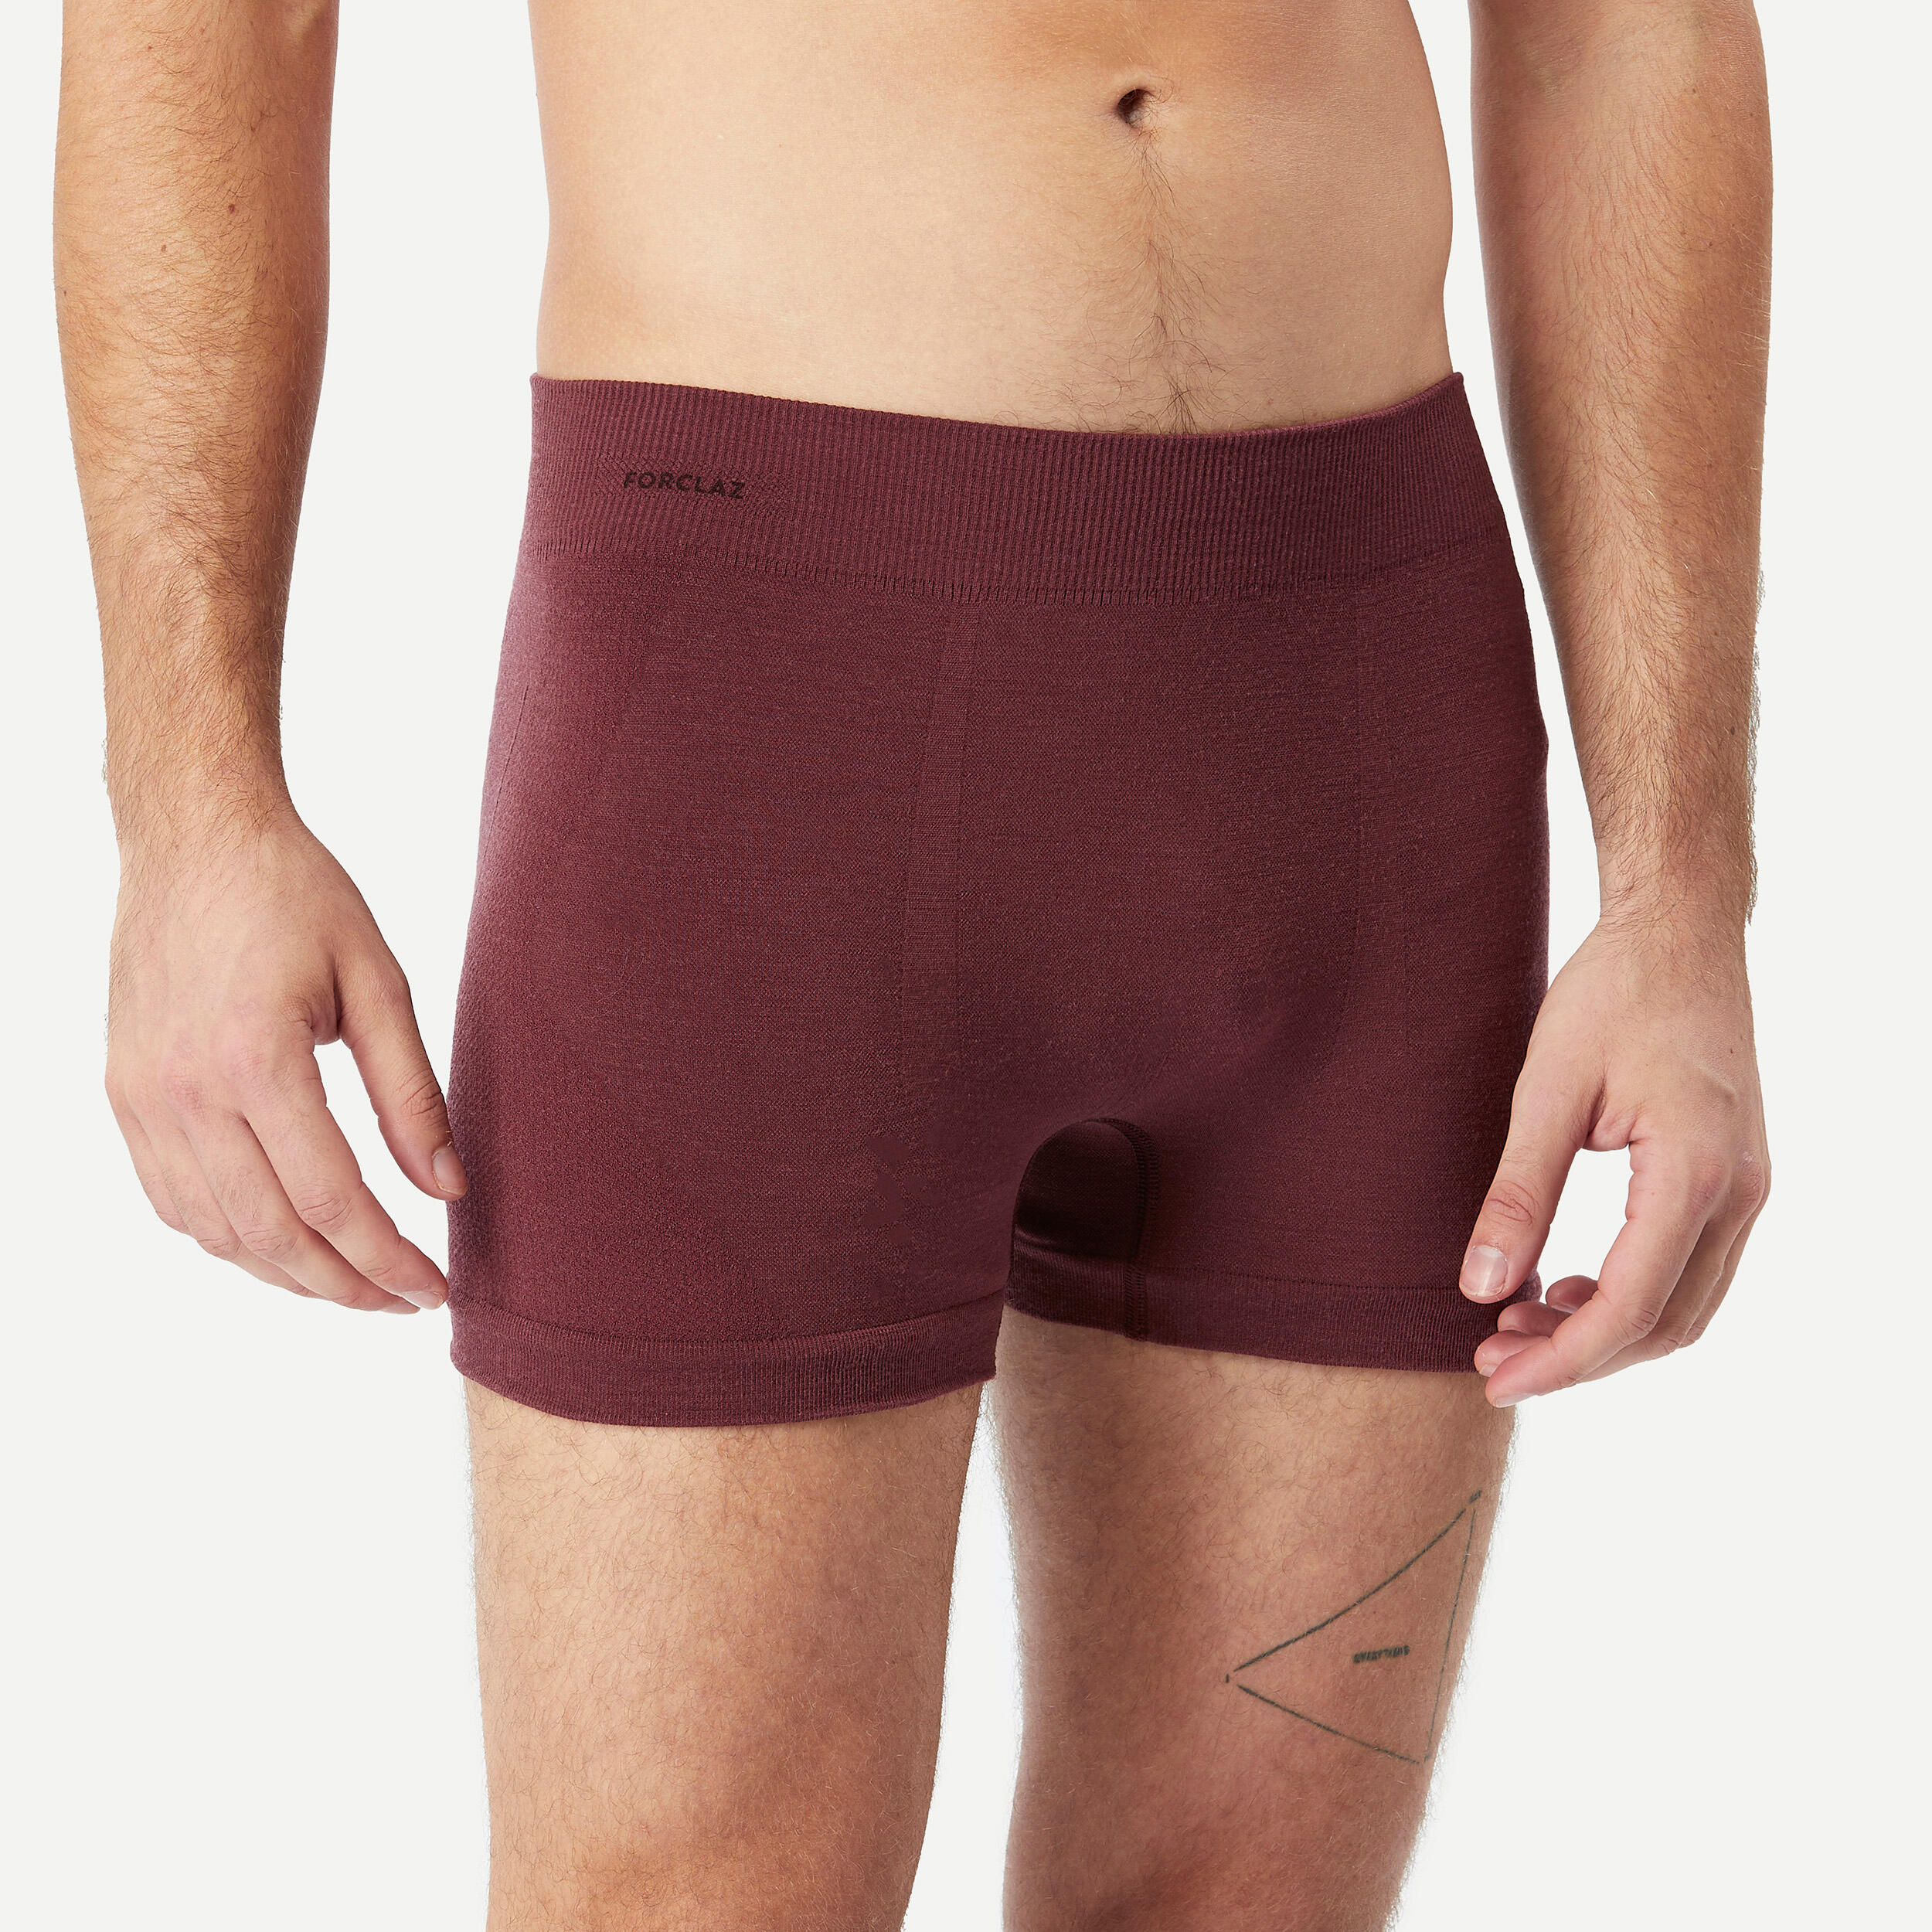 Review: Forclaz MT500 merino boxer shorts - Decathlons specialty tested!